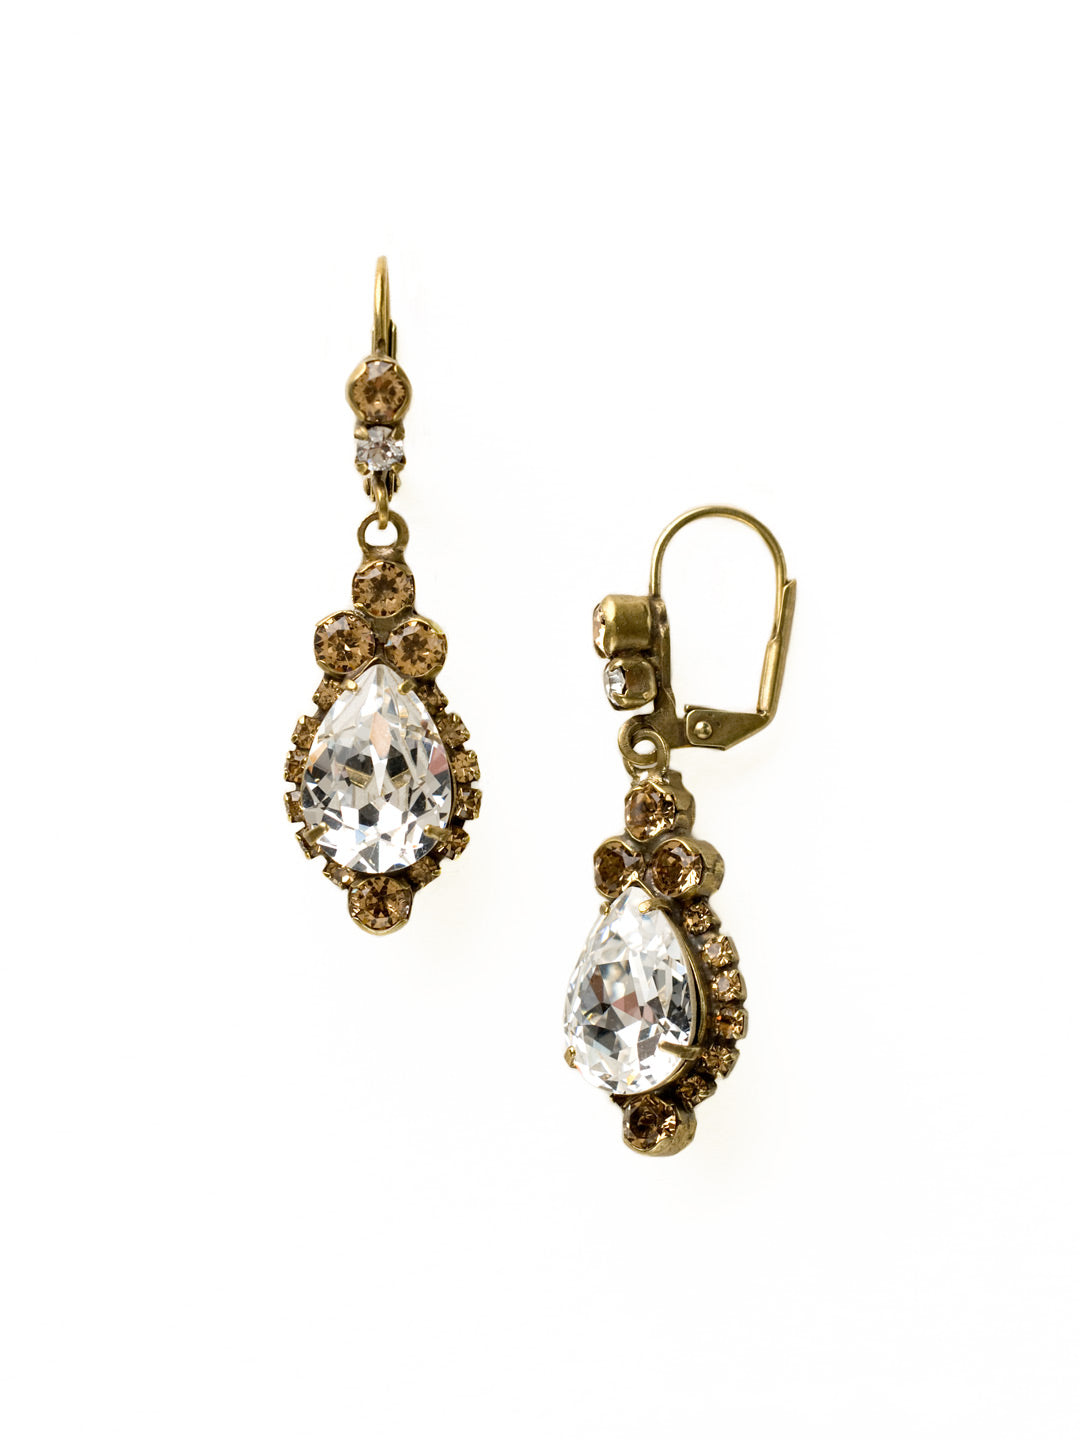 Sweet Treats Dangle Earrings - ECM19AGNT - <p>Sweet treats for your ears. These French wire earrings have a simple post dripping with shine. Pear shaped crystals surrounded by rhinestones are the perfect topping to any outfit. From Sorrelli's Neutral Territory collection in our Antique Gold-tone finish.</p>